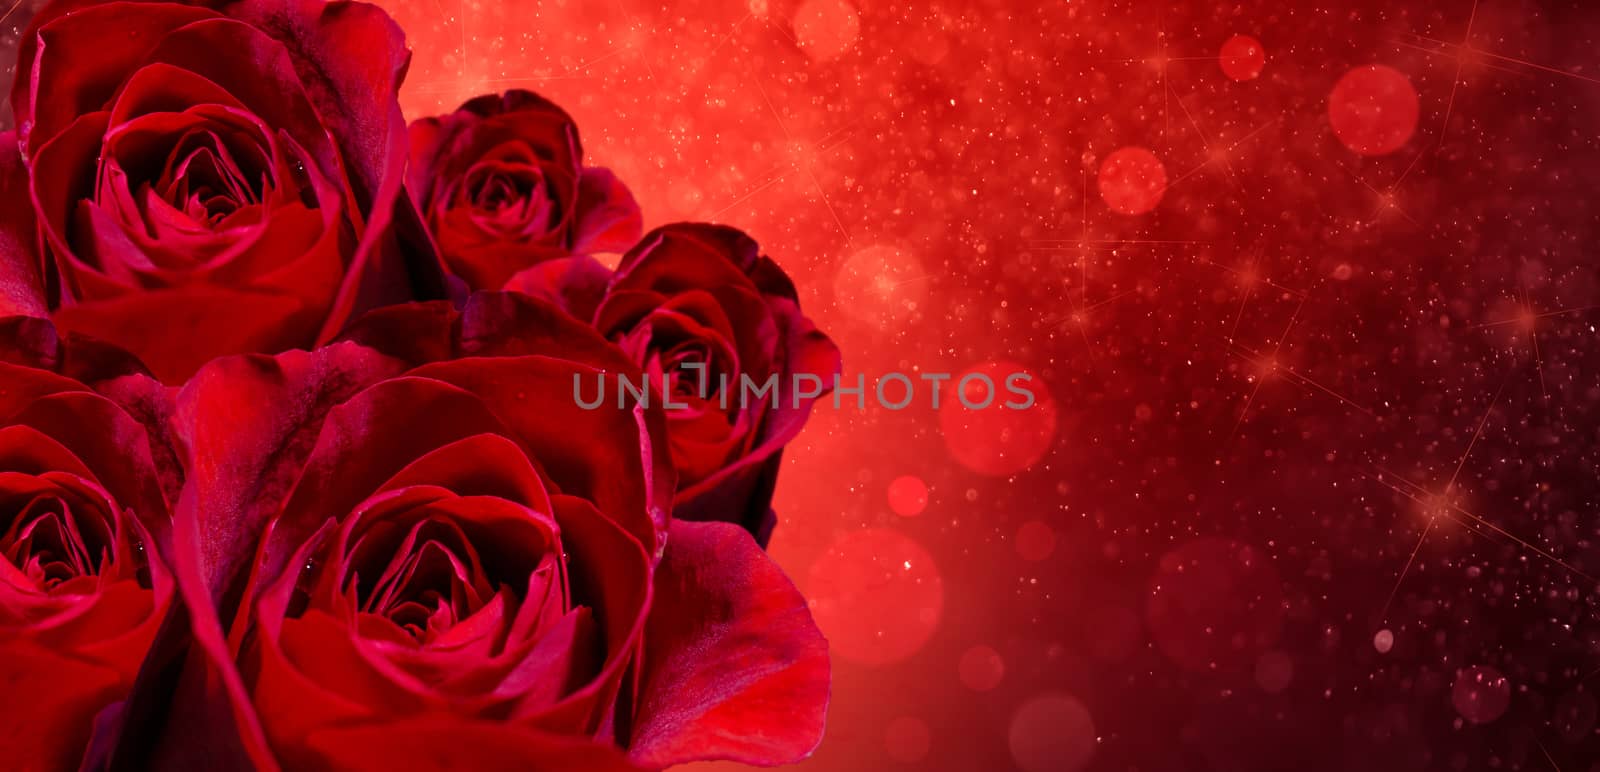 Banner Red rose bokeh red background Have space to enter text